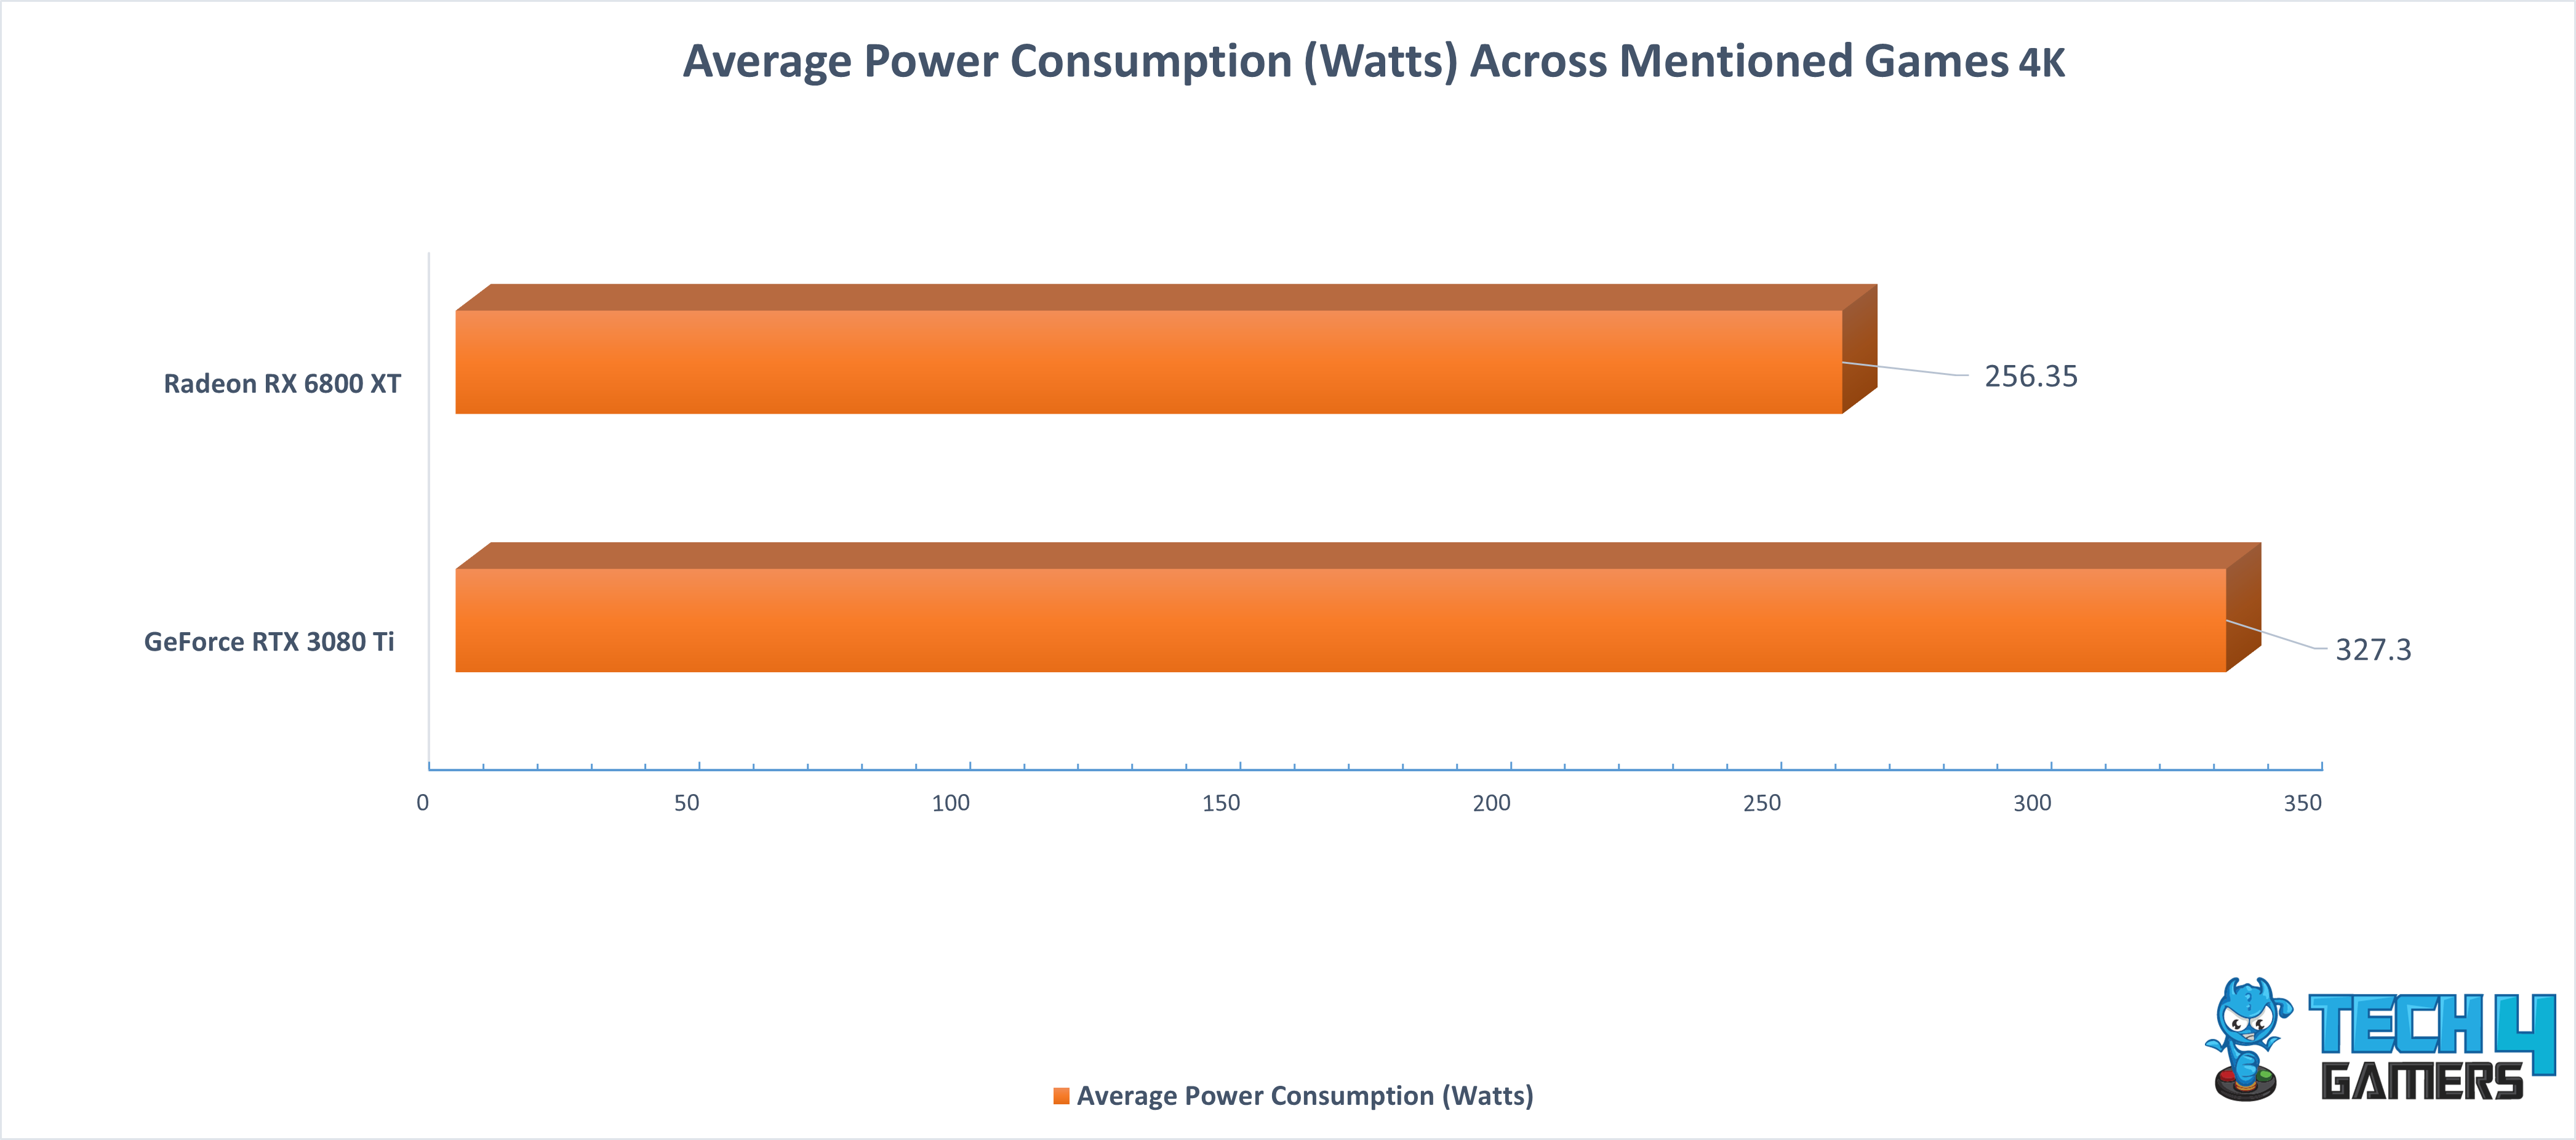 Average Power Consumption Across Mentioned Games